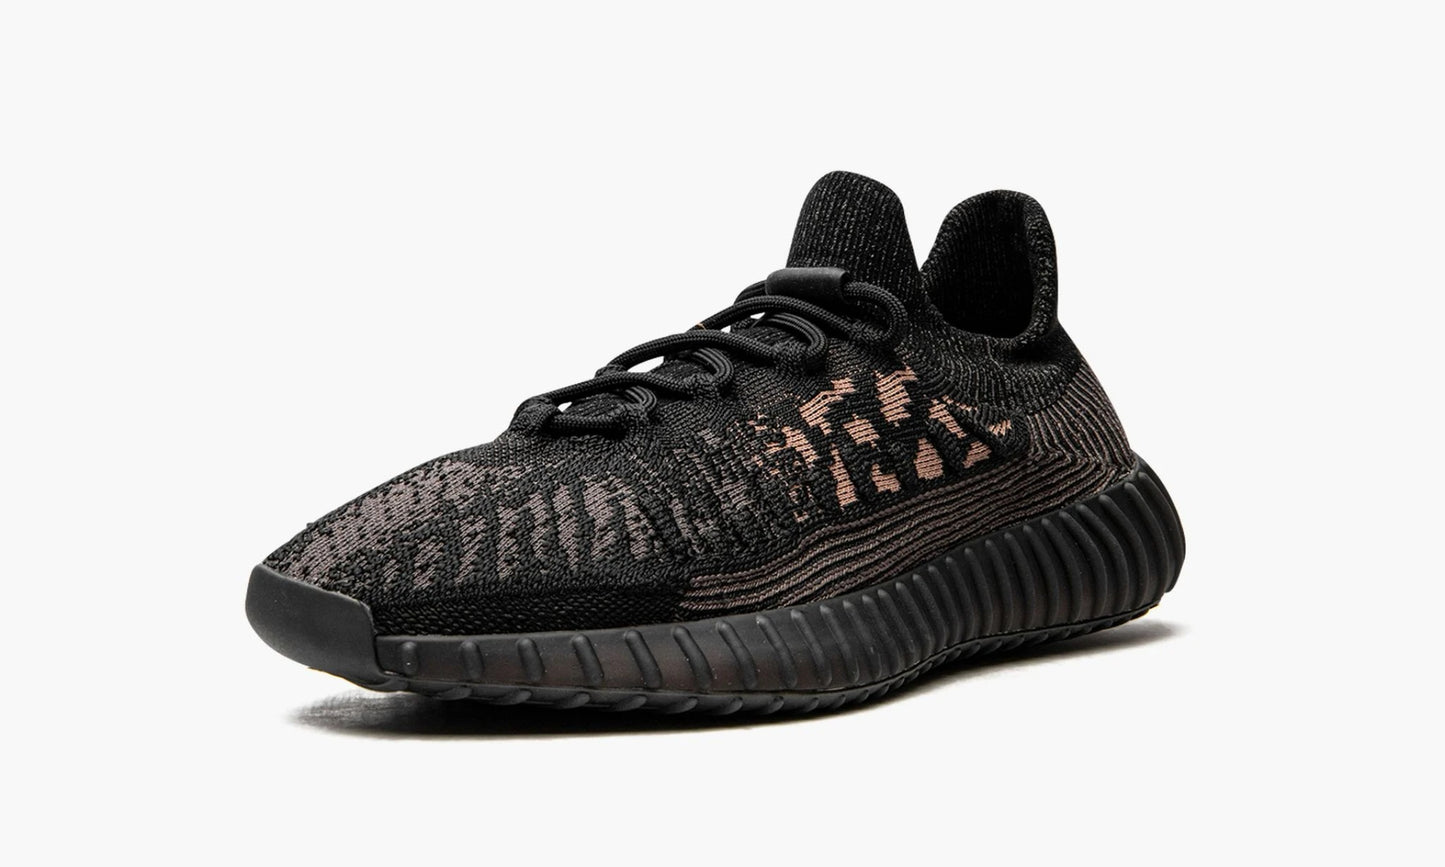 Yeezy Boost 350 V2 CMPCT "Slate Carbon"